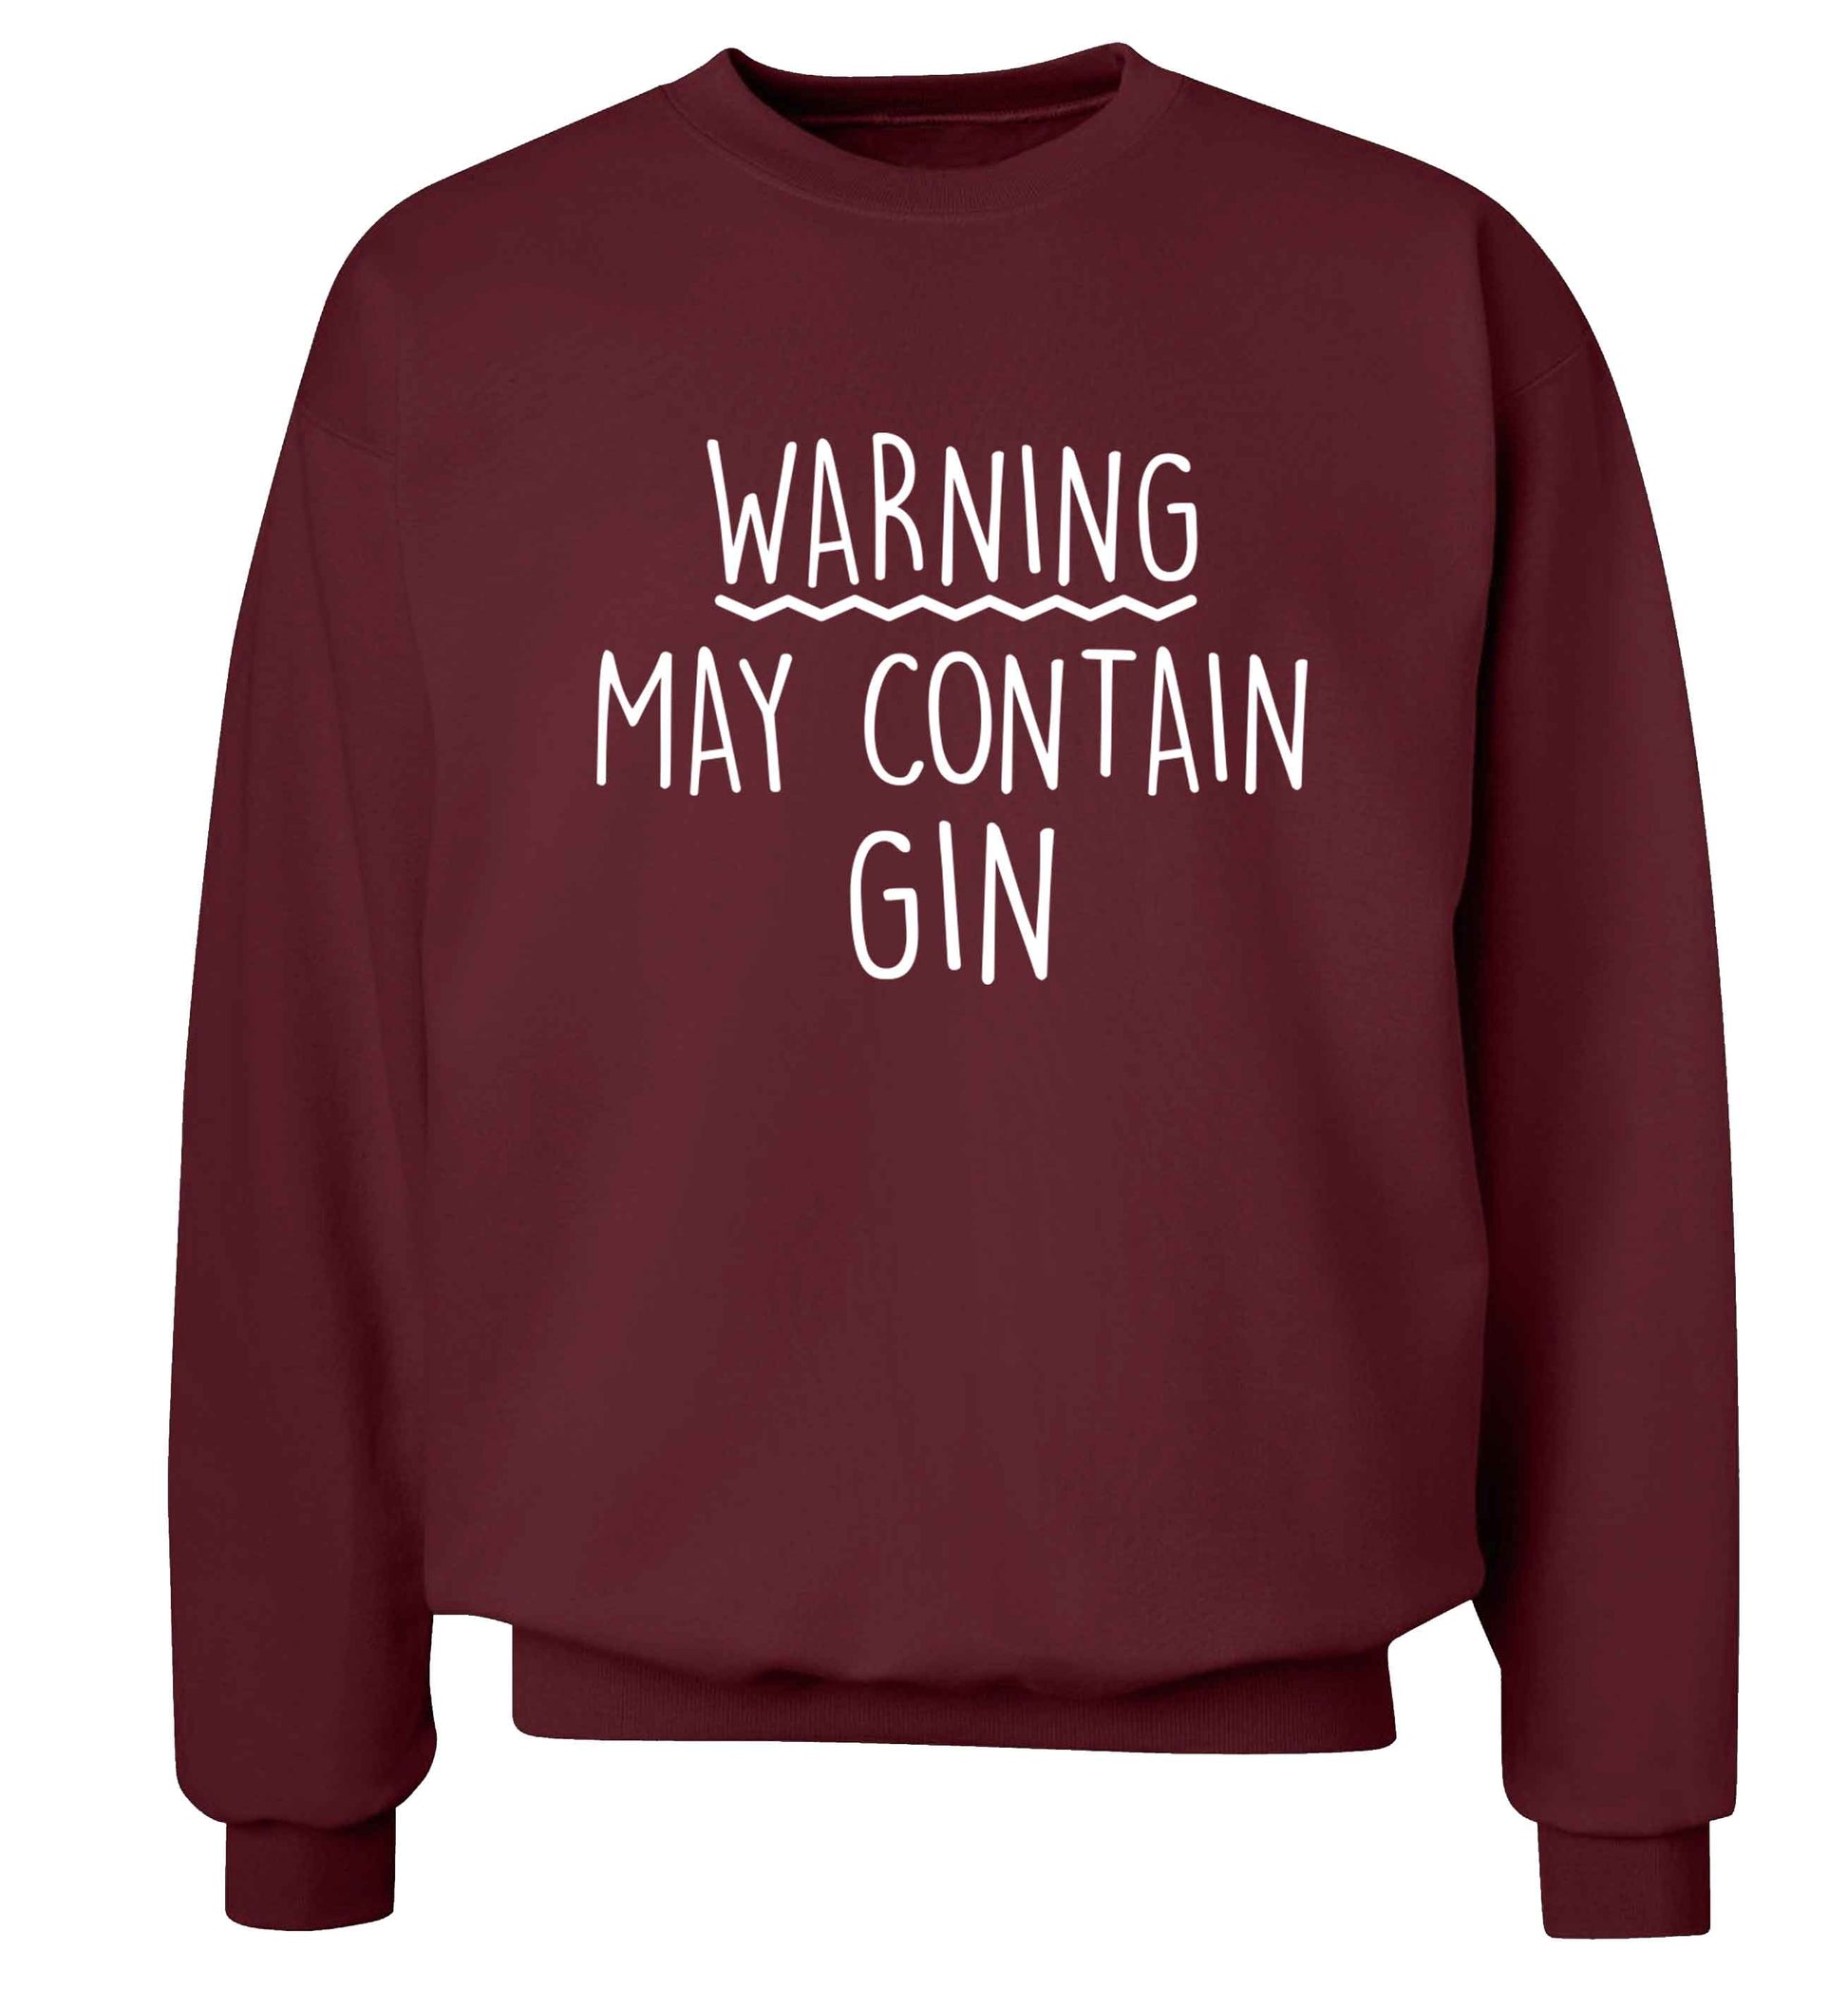 Warning may contain gin Adult's unisex maroon Sweater 2XL